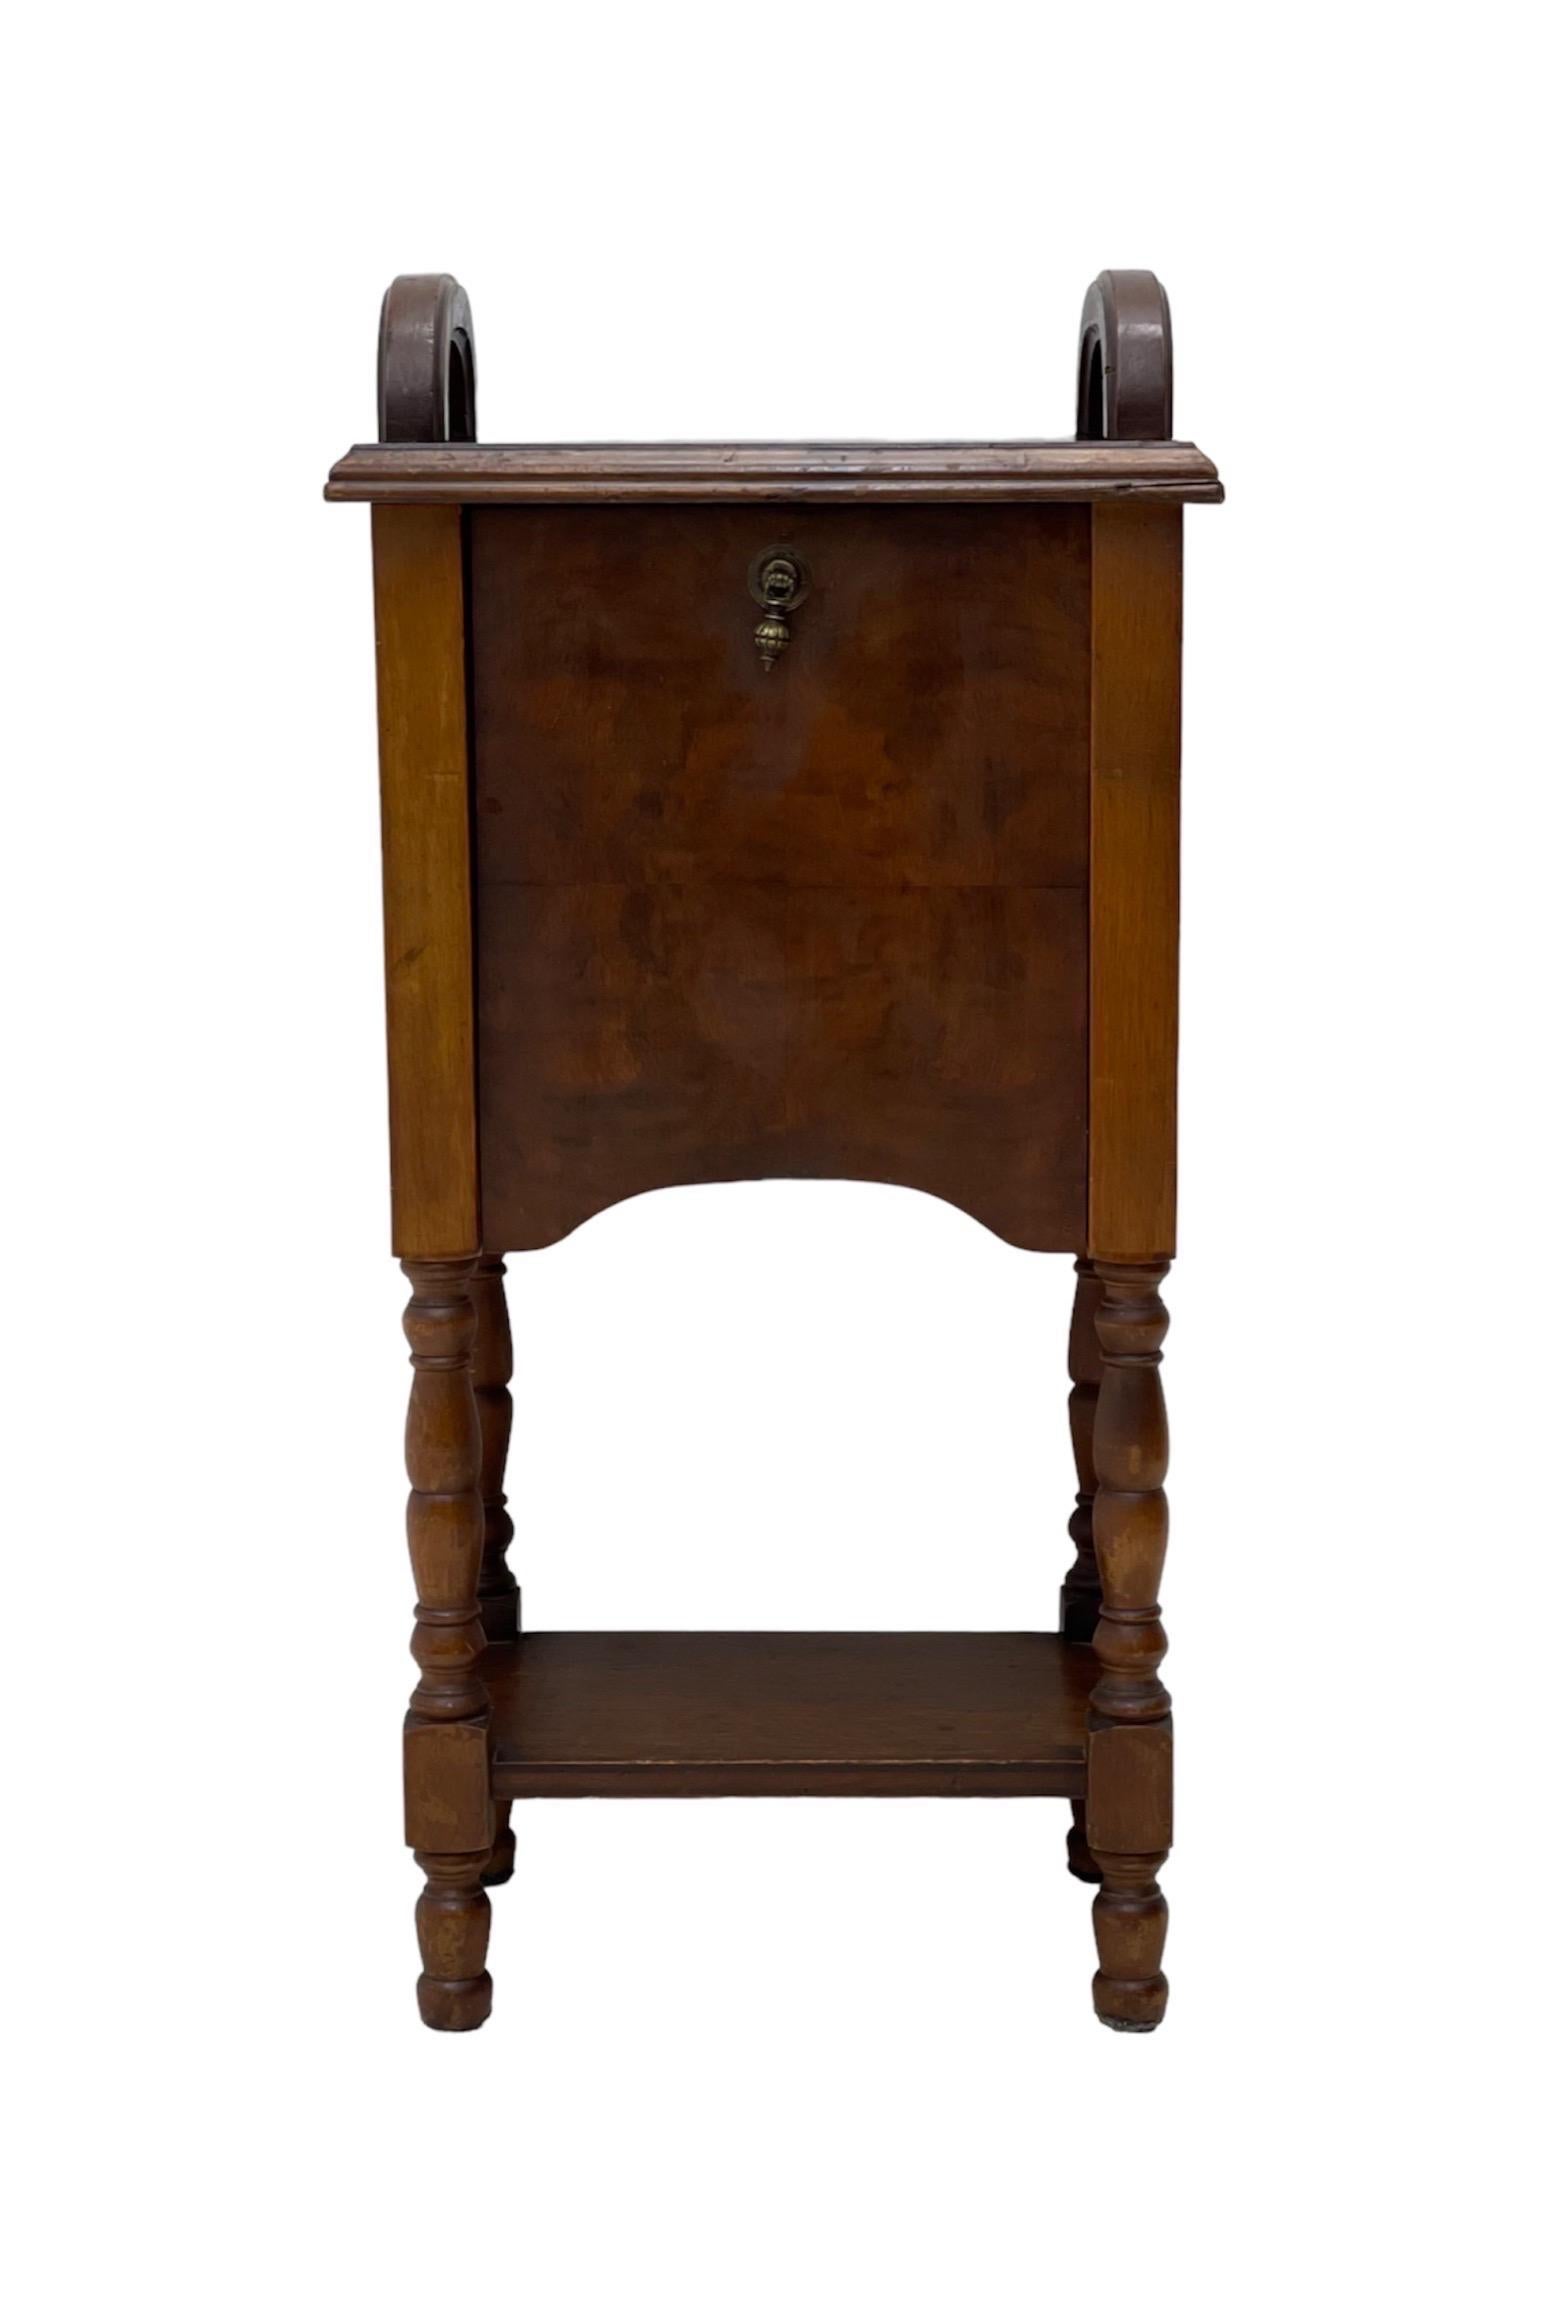 Antique colonial style accent table stand.

Dimensions. 13 W ; 9 1/2 D ; 26 1/2 H.